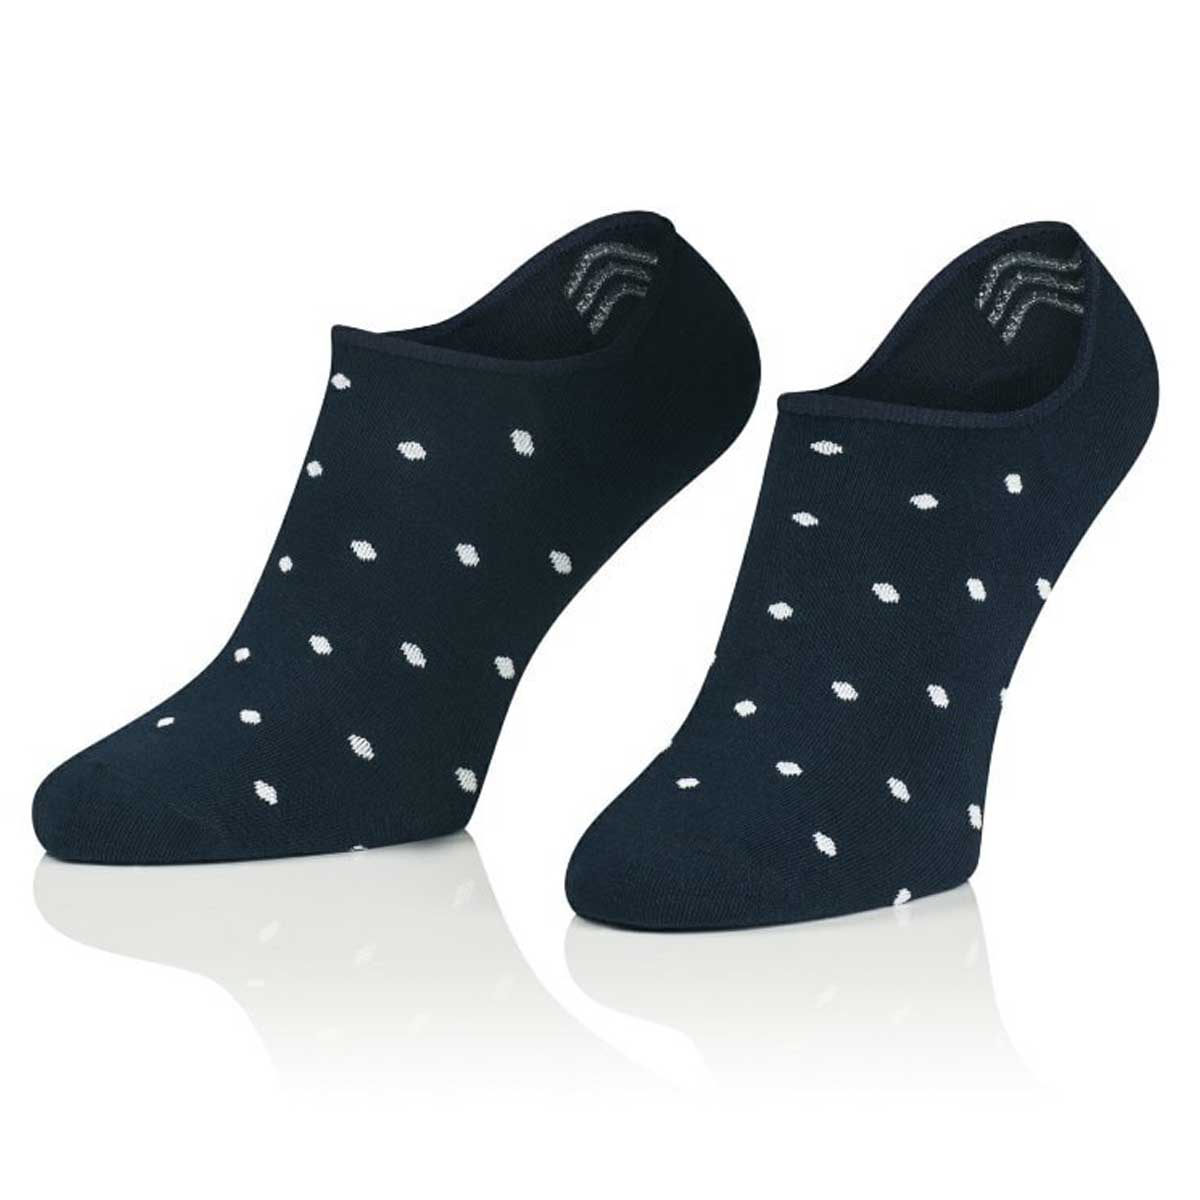 Cotton men's navy blue no show socks with white dots